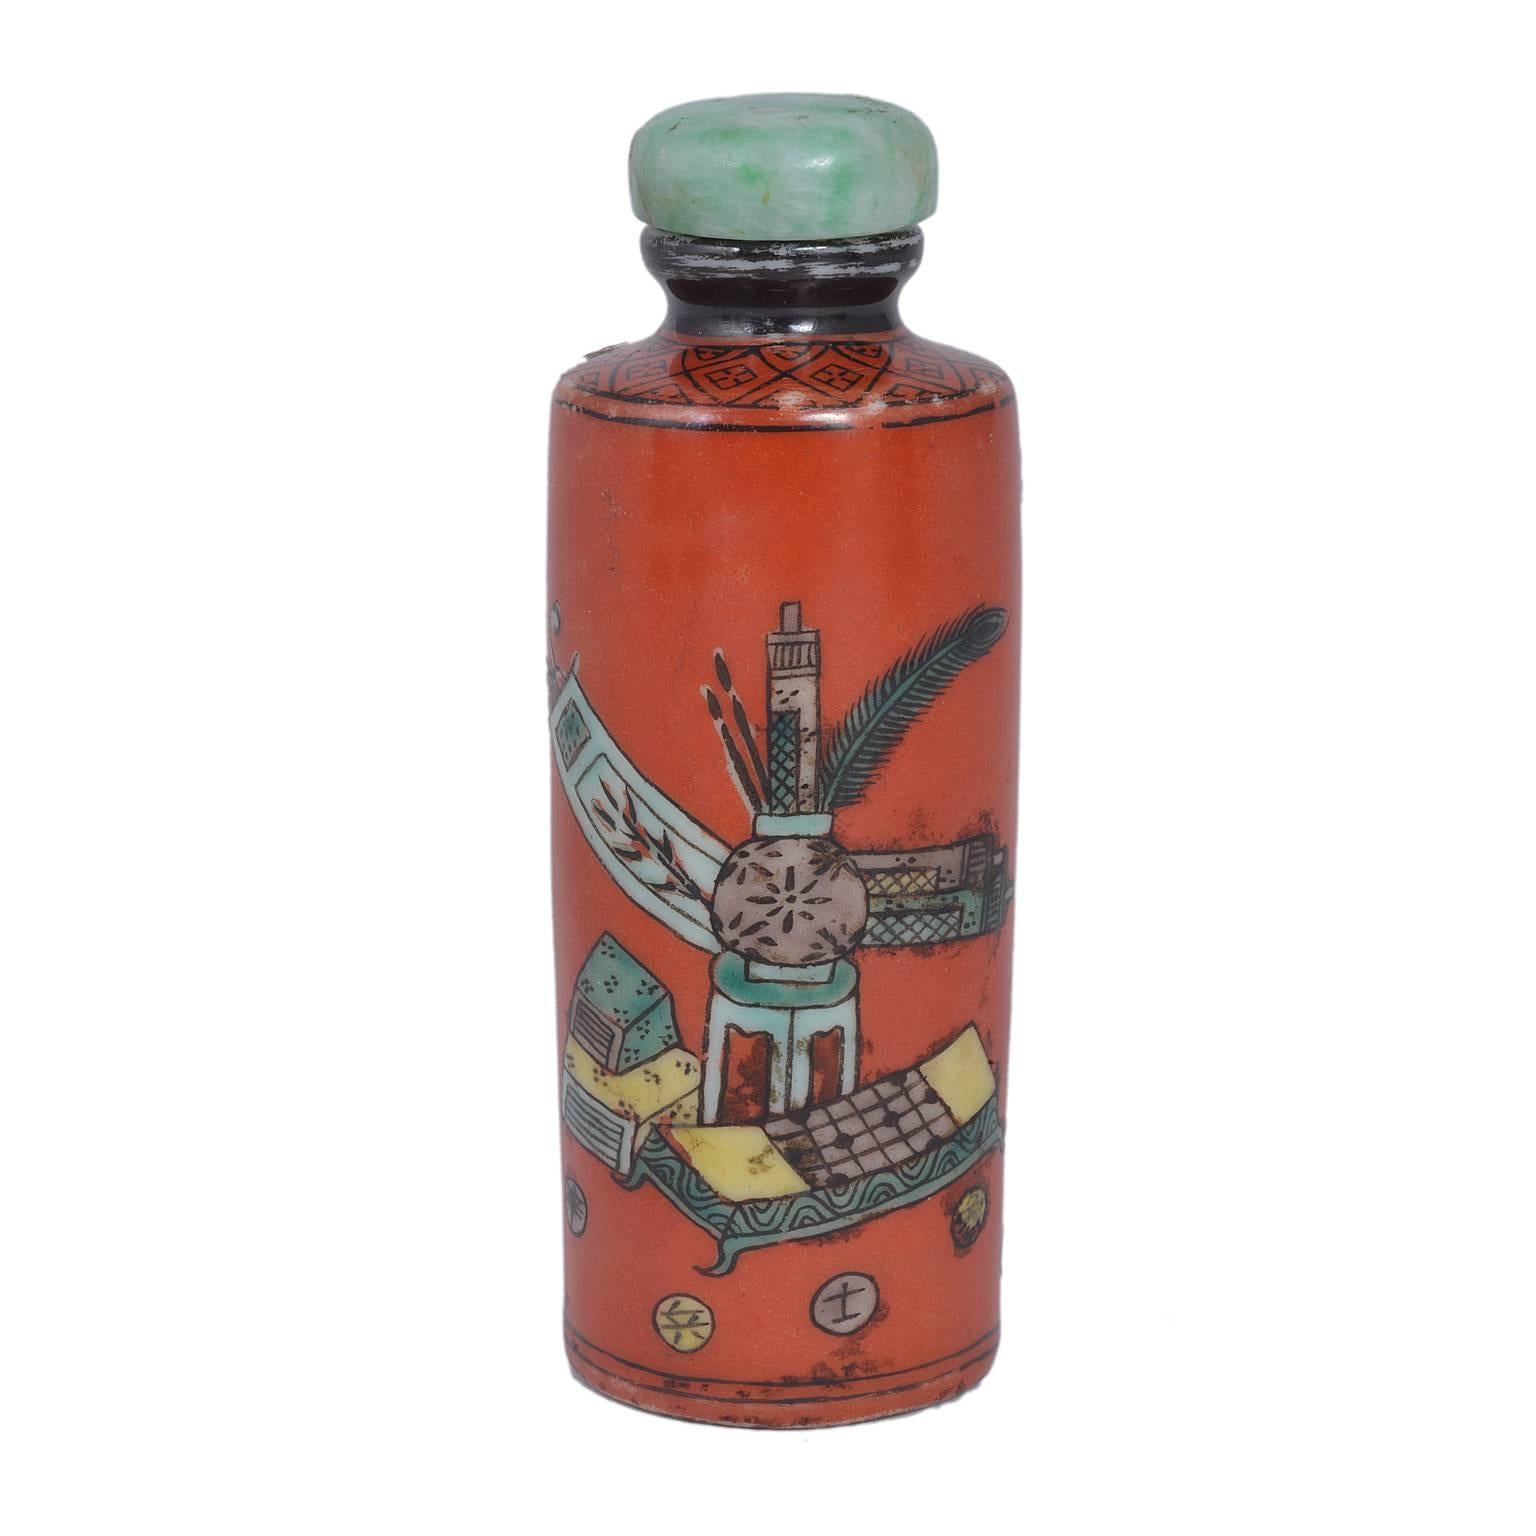 Snuff bottle with mark and period go Guangxu, circa 1900.
Jade lid, antiquities decoration on coral red background.